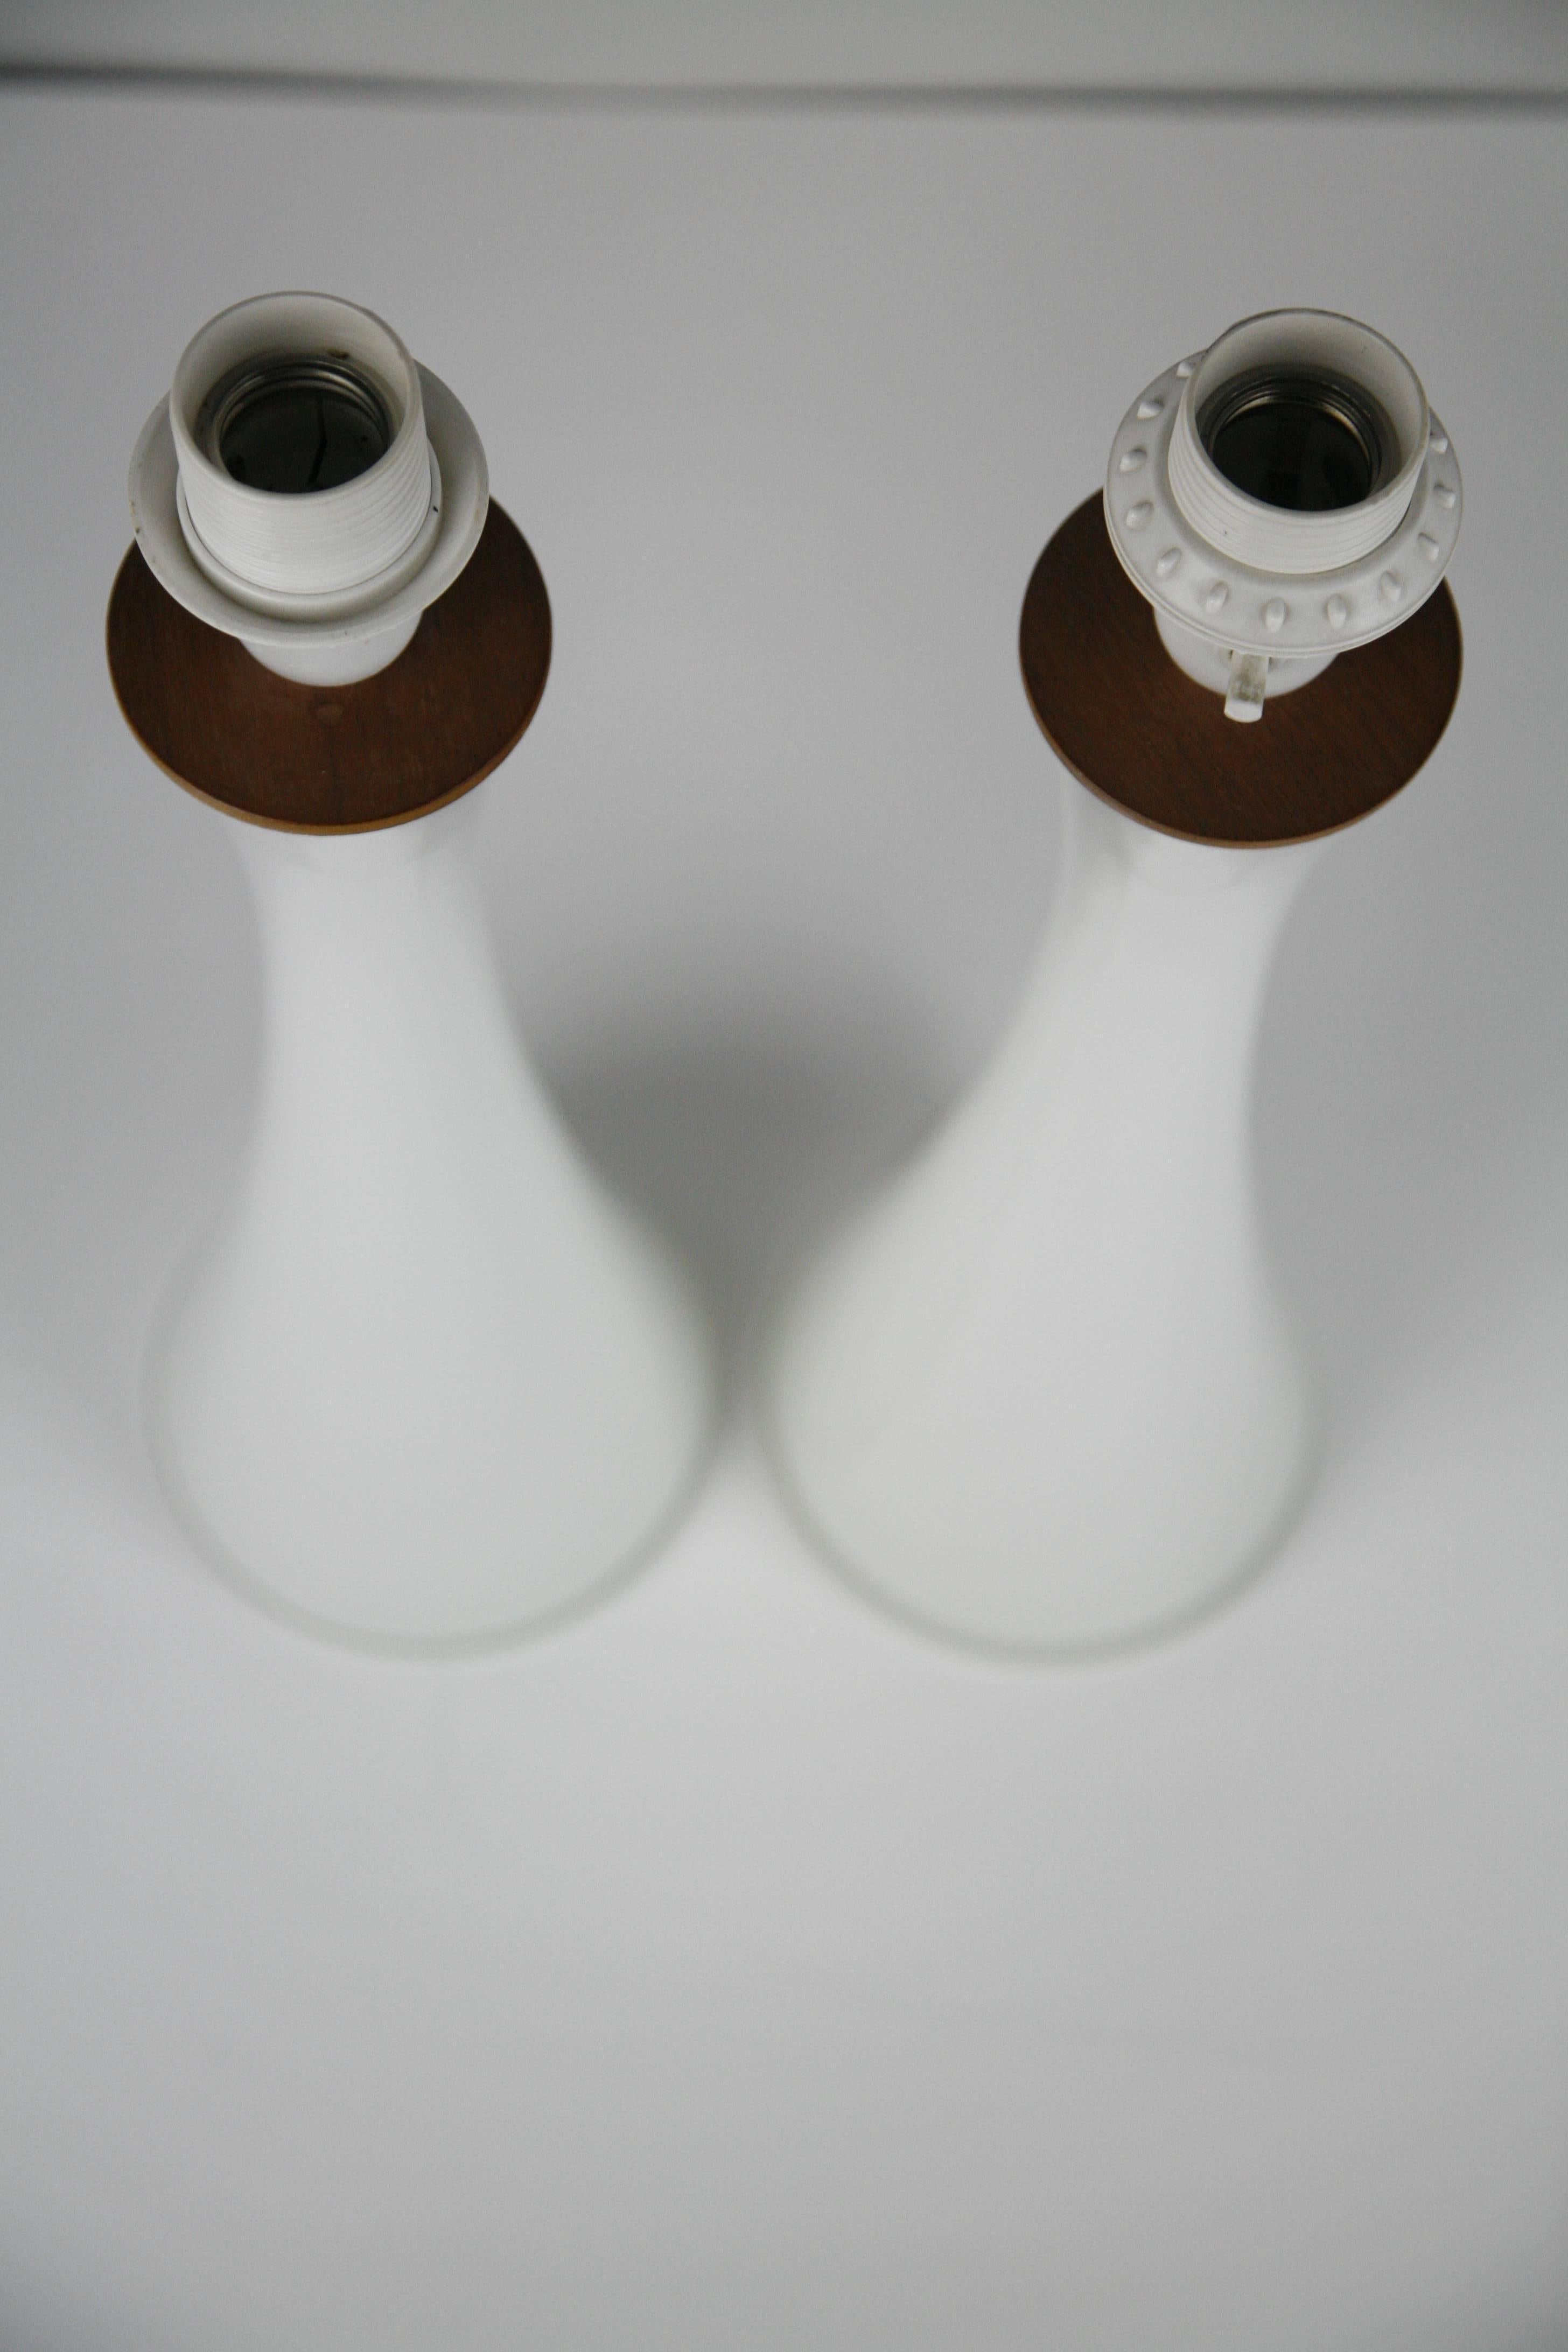 Pair of opaline glass lamps by Bergboms, Sweden, 1960.
White glass incased of a layer of white matte glass with teak tree fittings, modern Classic Scandinavian clean look.

Rewired for the US.